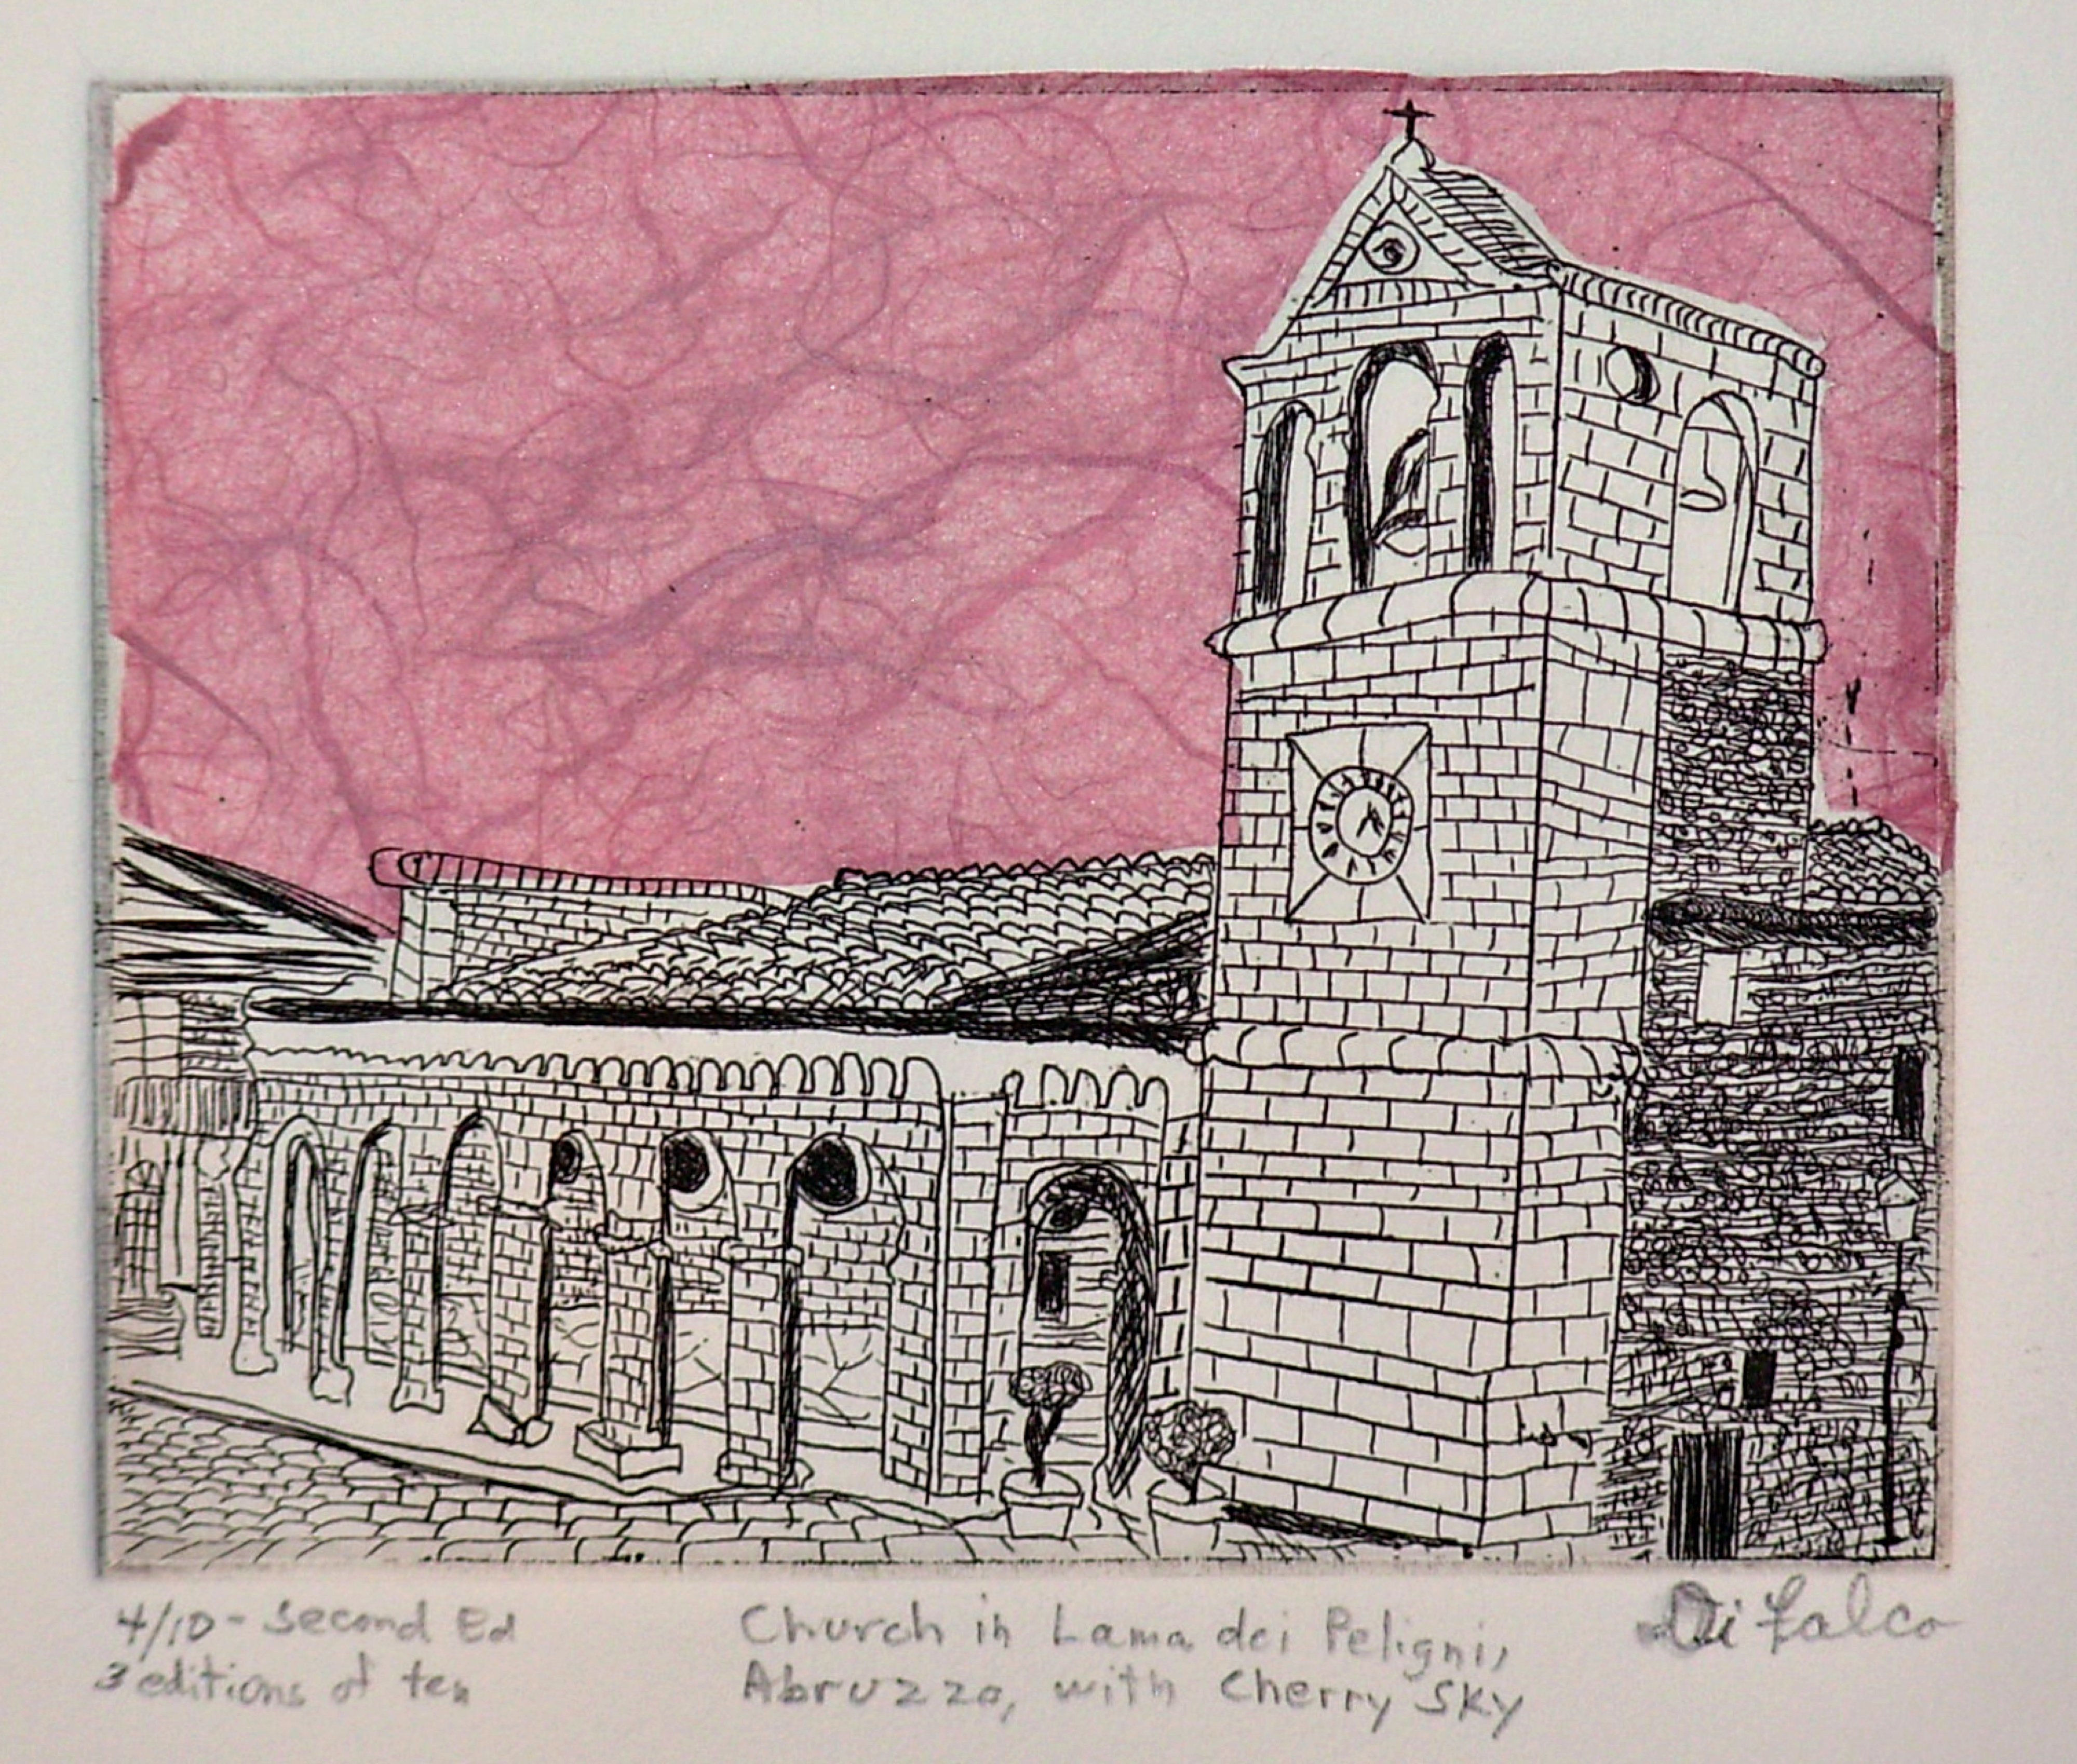 Jerry  Di Falco: 'Church In Lama dei Peligni Abruzzo with Cherry Sky', 2010 Intaglio, Architecture. FULL TITLE IS, Church In Lama dei Peligni Abruzzo with Cherry Sky. This intaglio etching also uses the Chine colle, or Chinese pasting, technique to add color to the print via the use of mulberry bark paper from Thailand treated with methyl cellulose. Media include black oil- based etching ink, ...